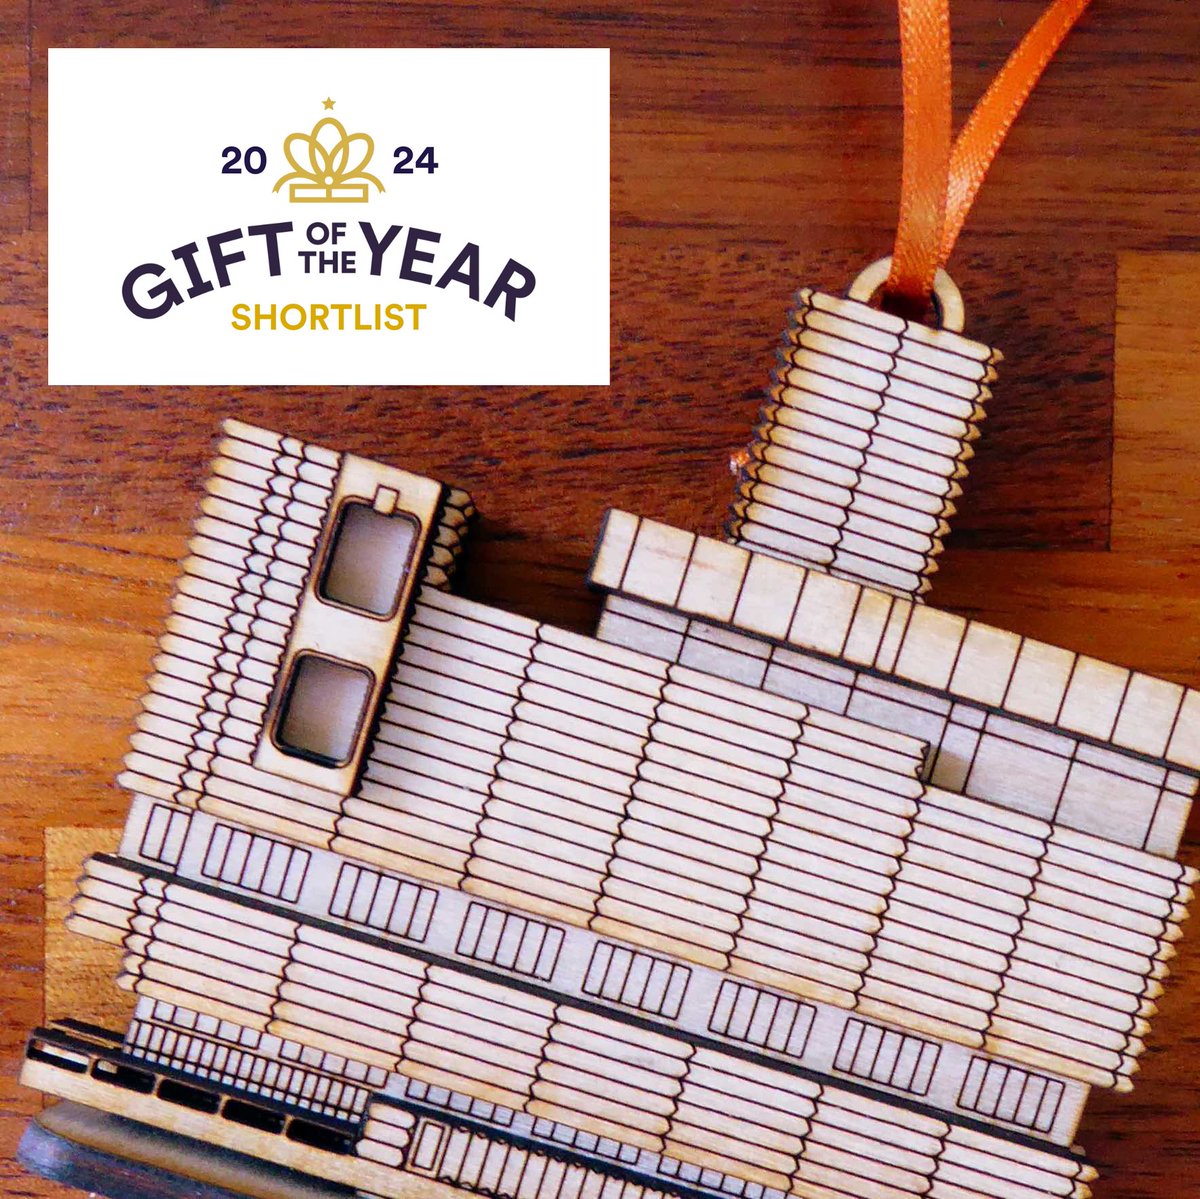 Great to the my wooden decorations shortlisted for this year's Gift of the Year awards 😀 @The_GA_UK